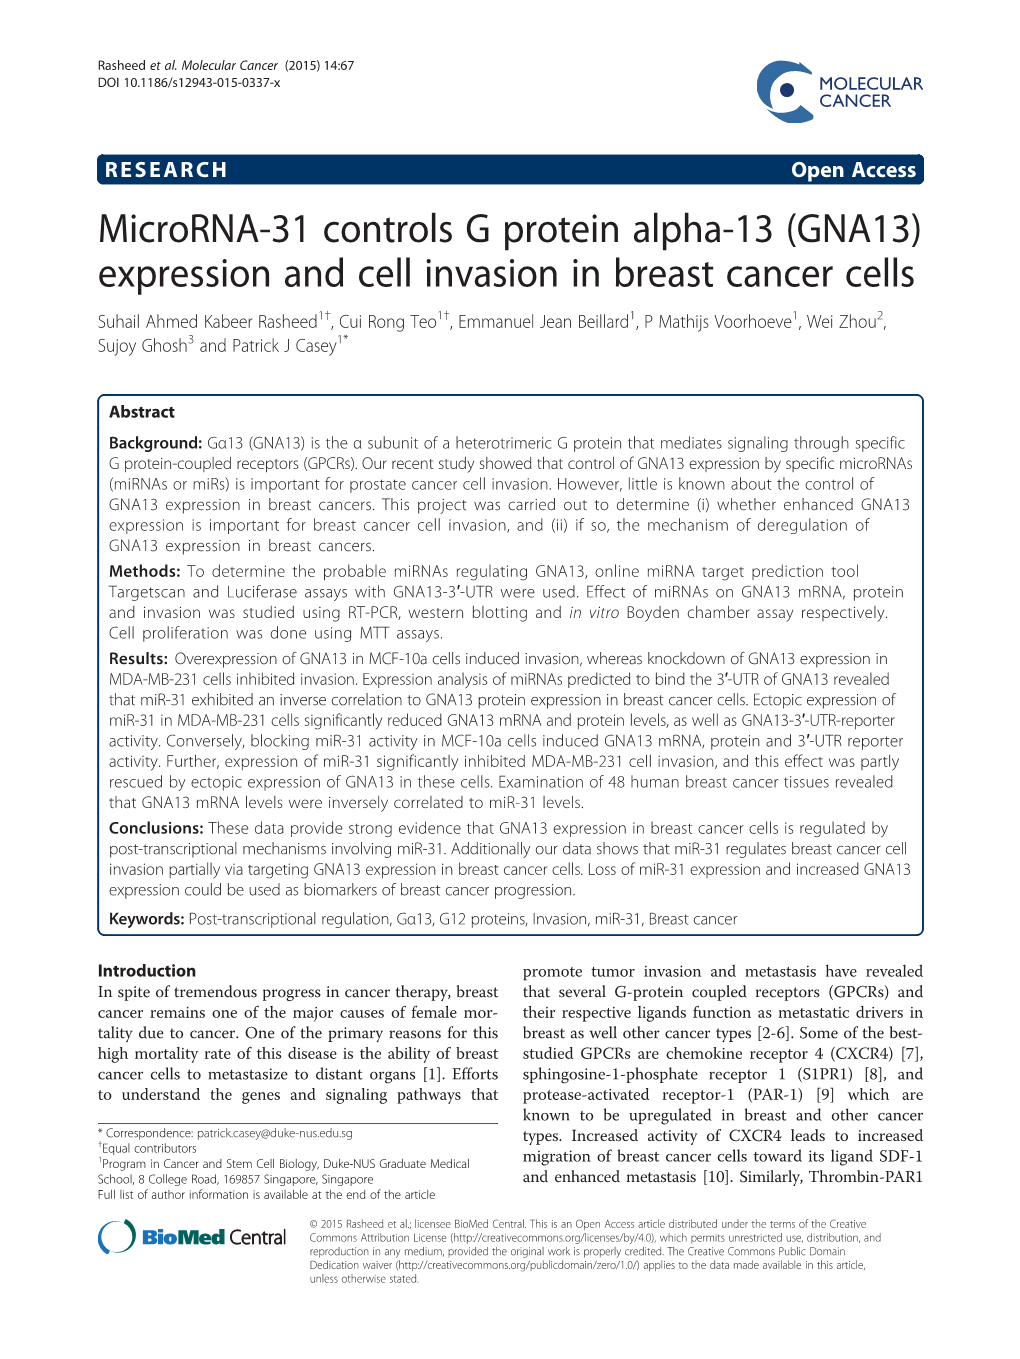 Microrna-31 Controls G Protein Alpha-13 (GNA13) Expression and Cell